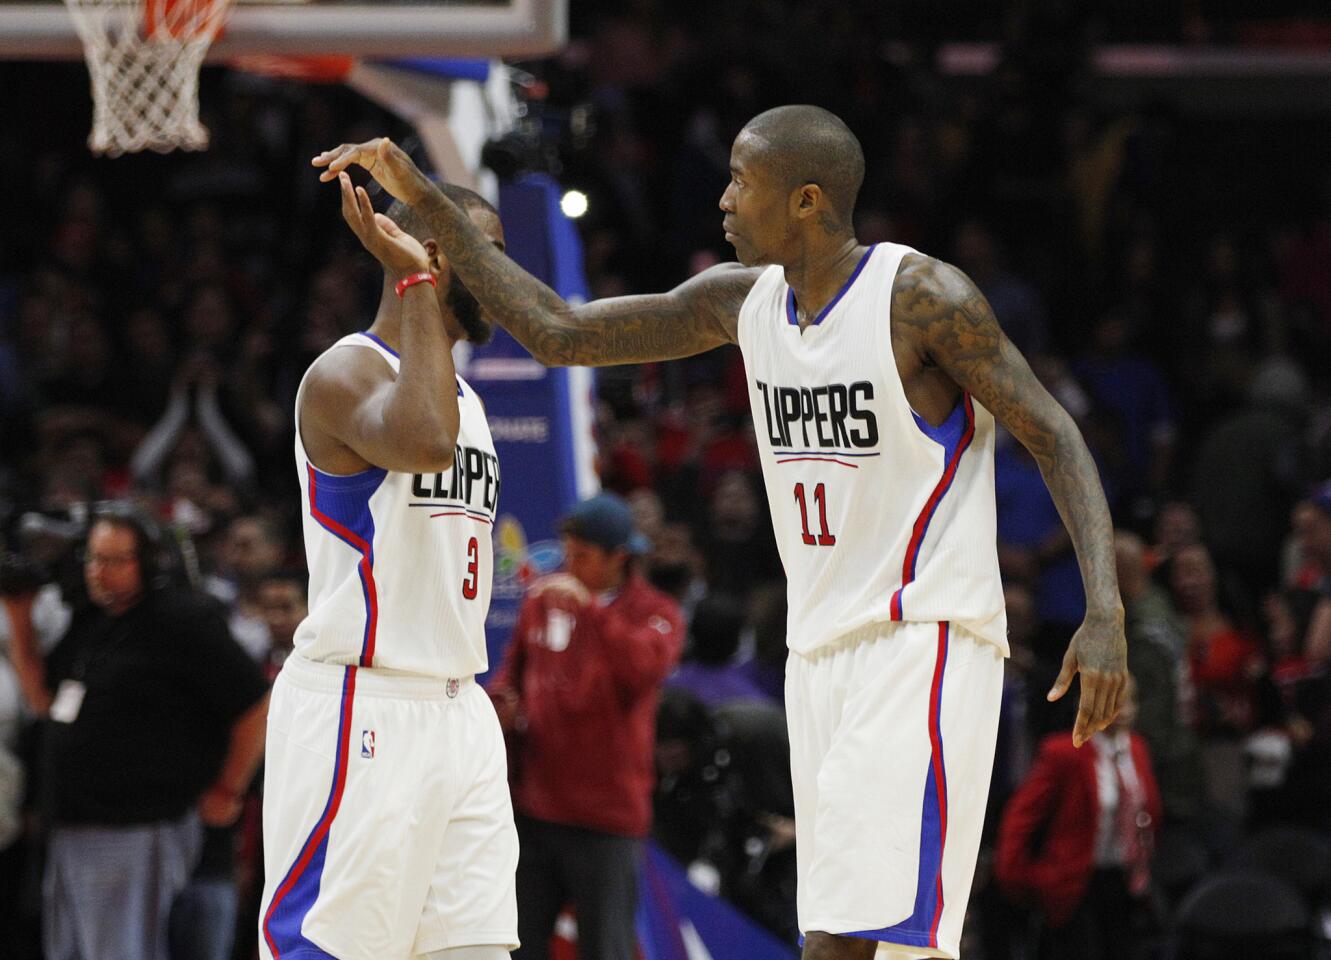 Clippers guards Chris Paul (3) and Jamal Crawford (11) celebrate after defeating the Charlotte Hornets, 97-83, on Saturday afternoon at Staples Center.